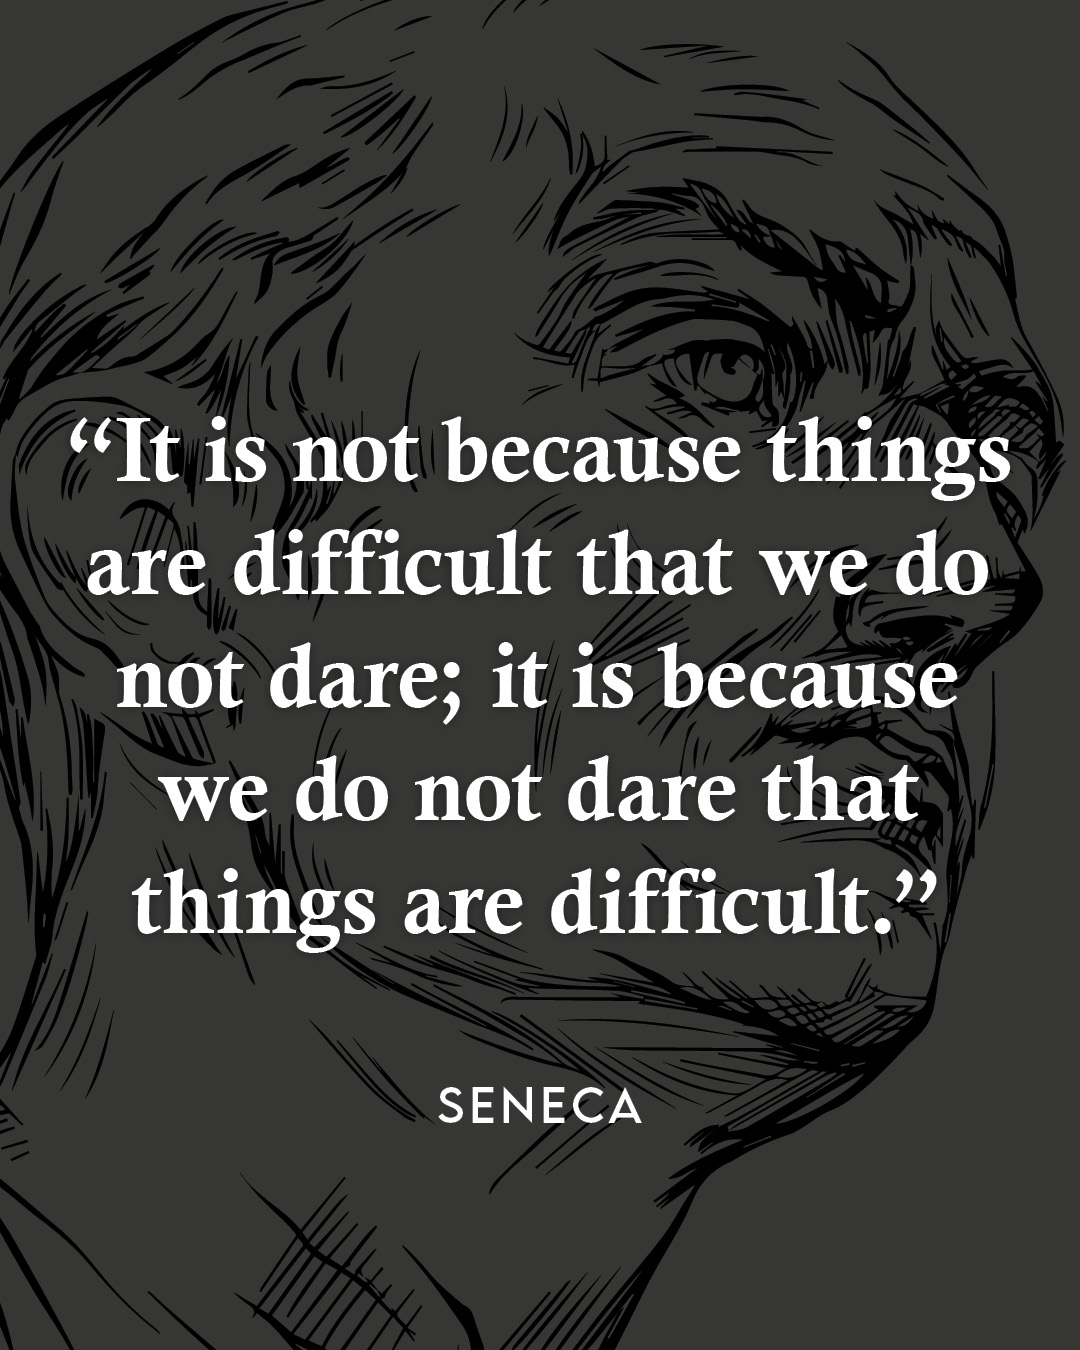 It is not because things are difficult that we do not dare, it is because we do not dare that things are difficult. – Seneca